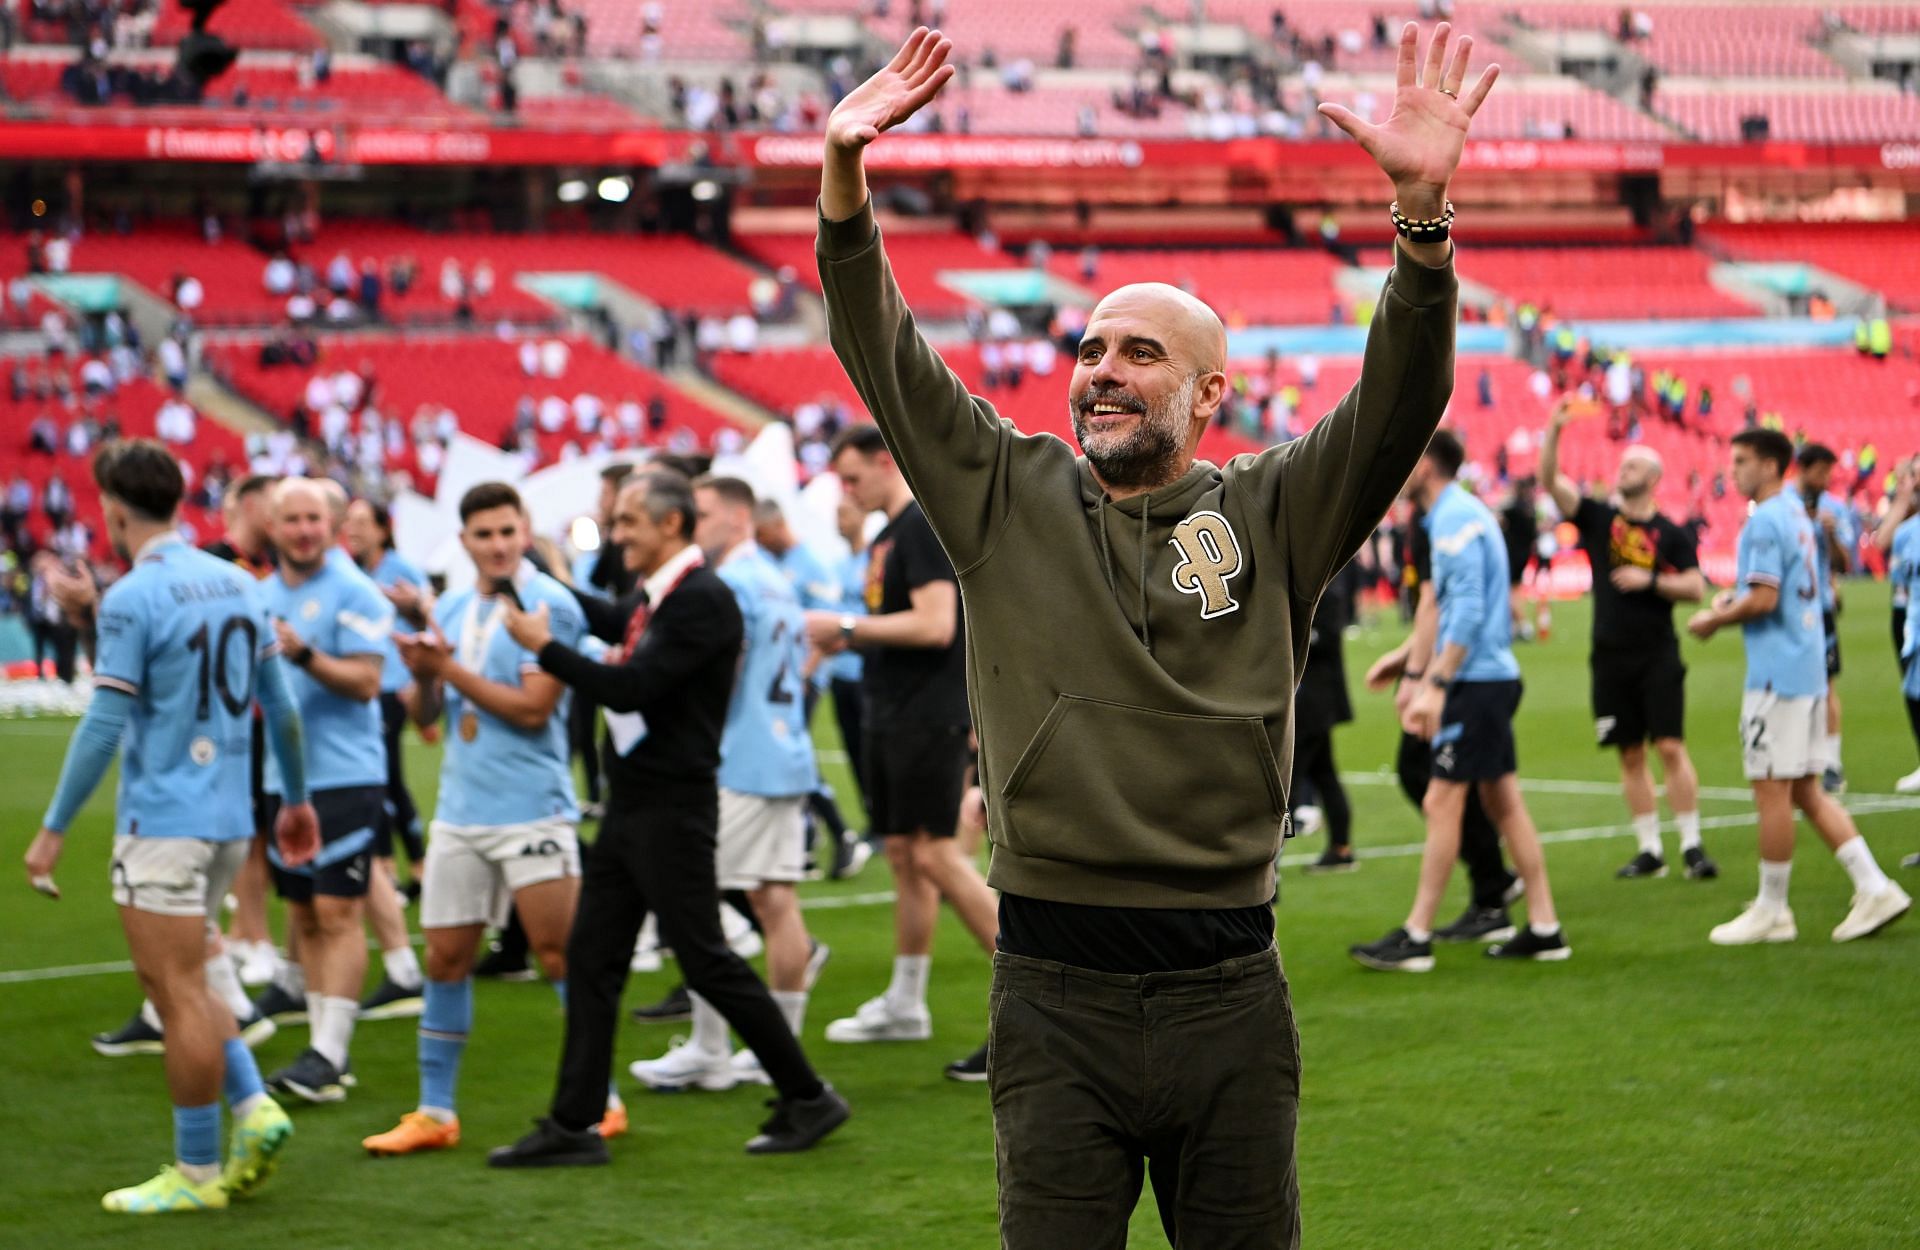 Pep Guardiola celebrates his FA Cup win over Manchester City at the Wembley.